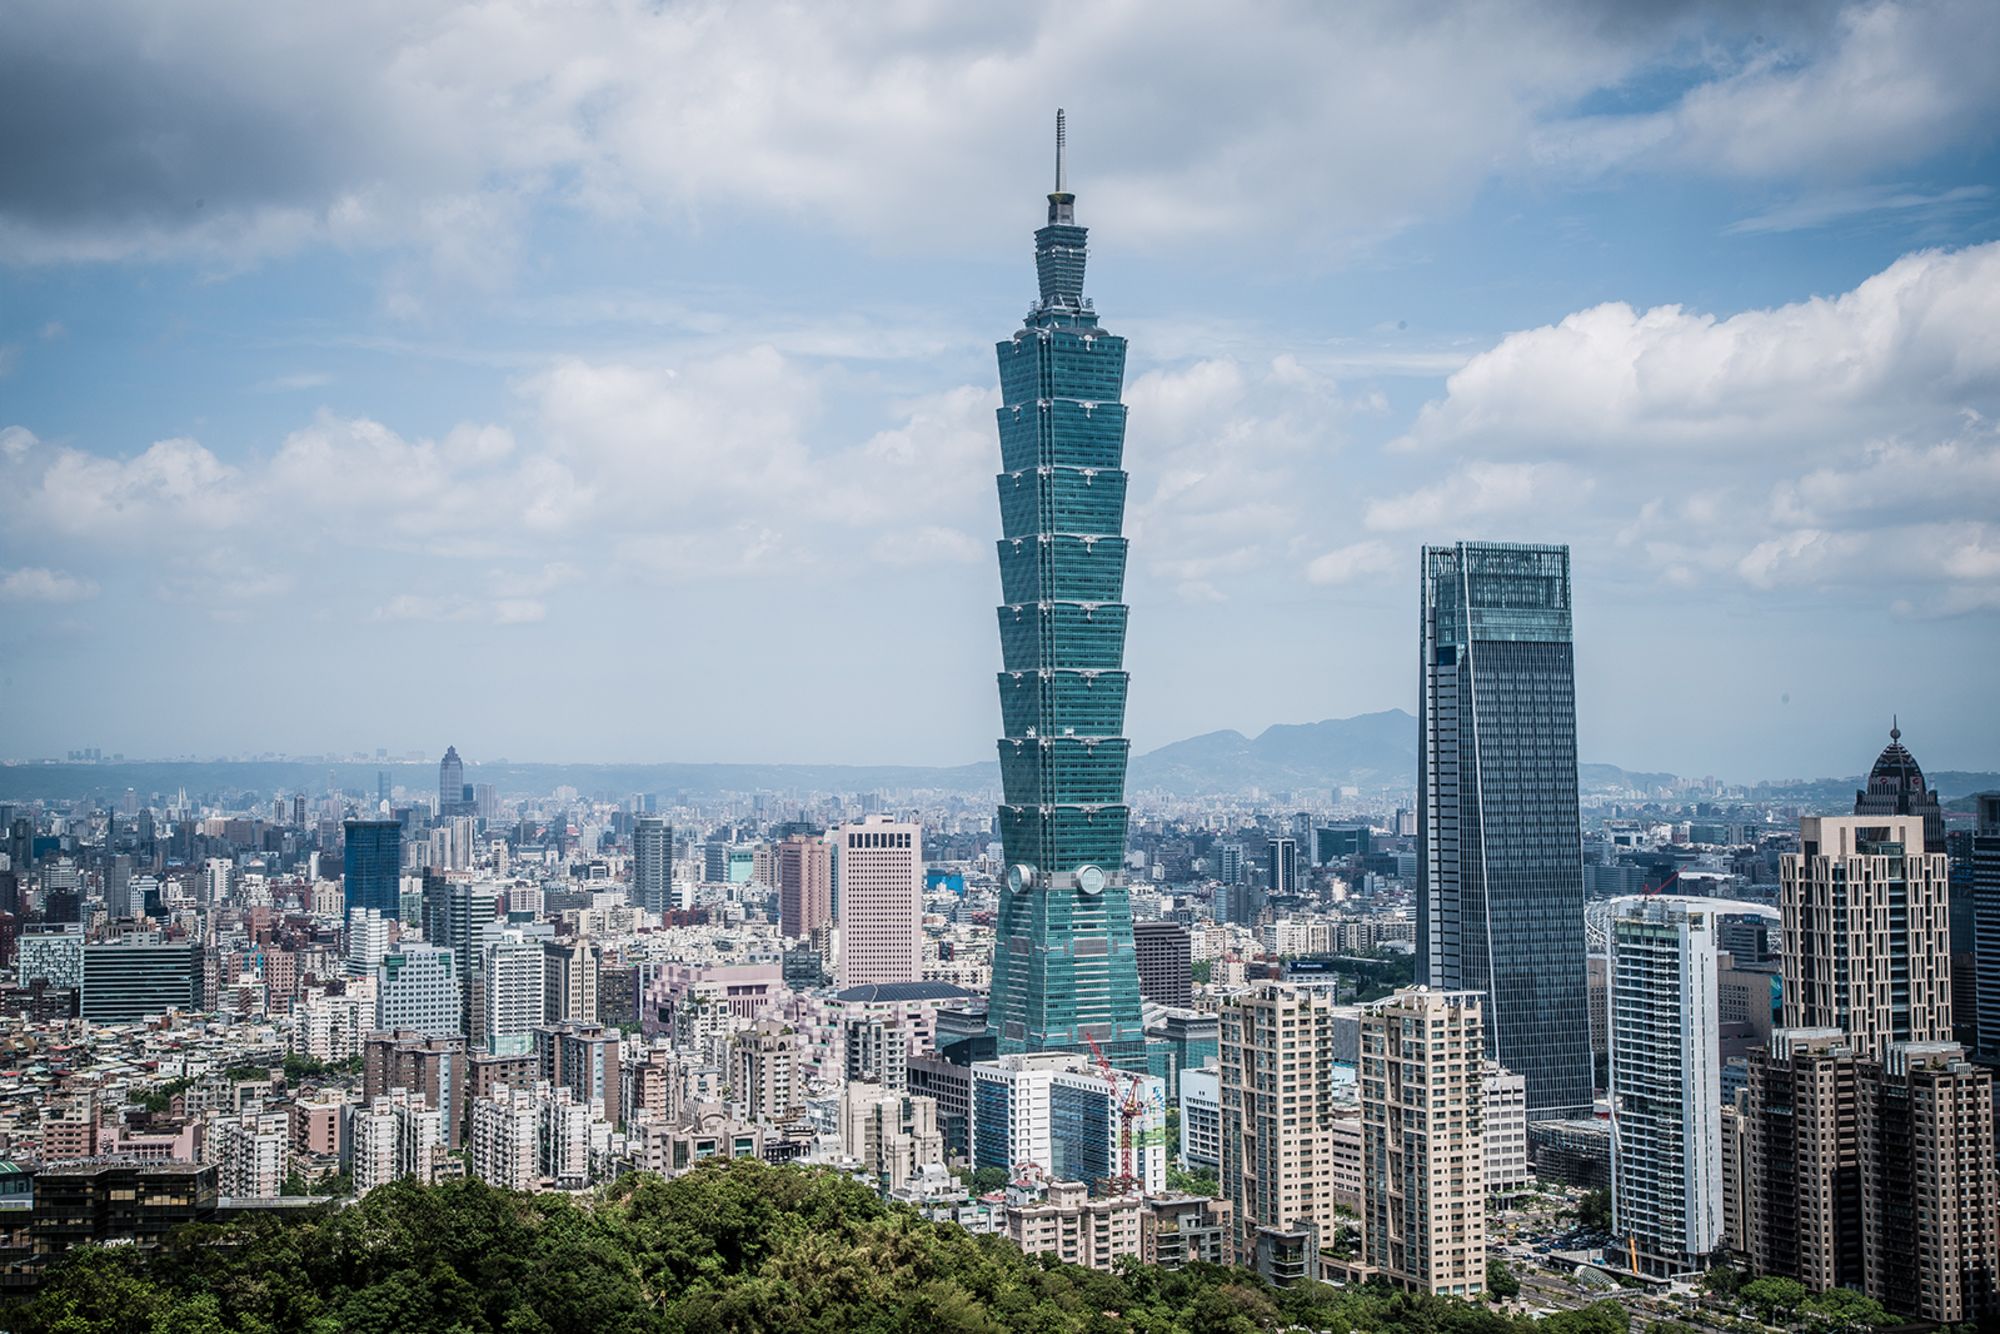 The Taipei 101 building in Taiwan's capital was the world's tallest skyscraper from 2004 to 2007.